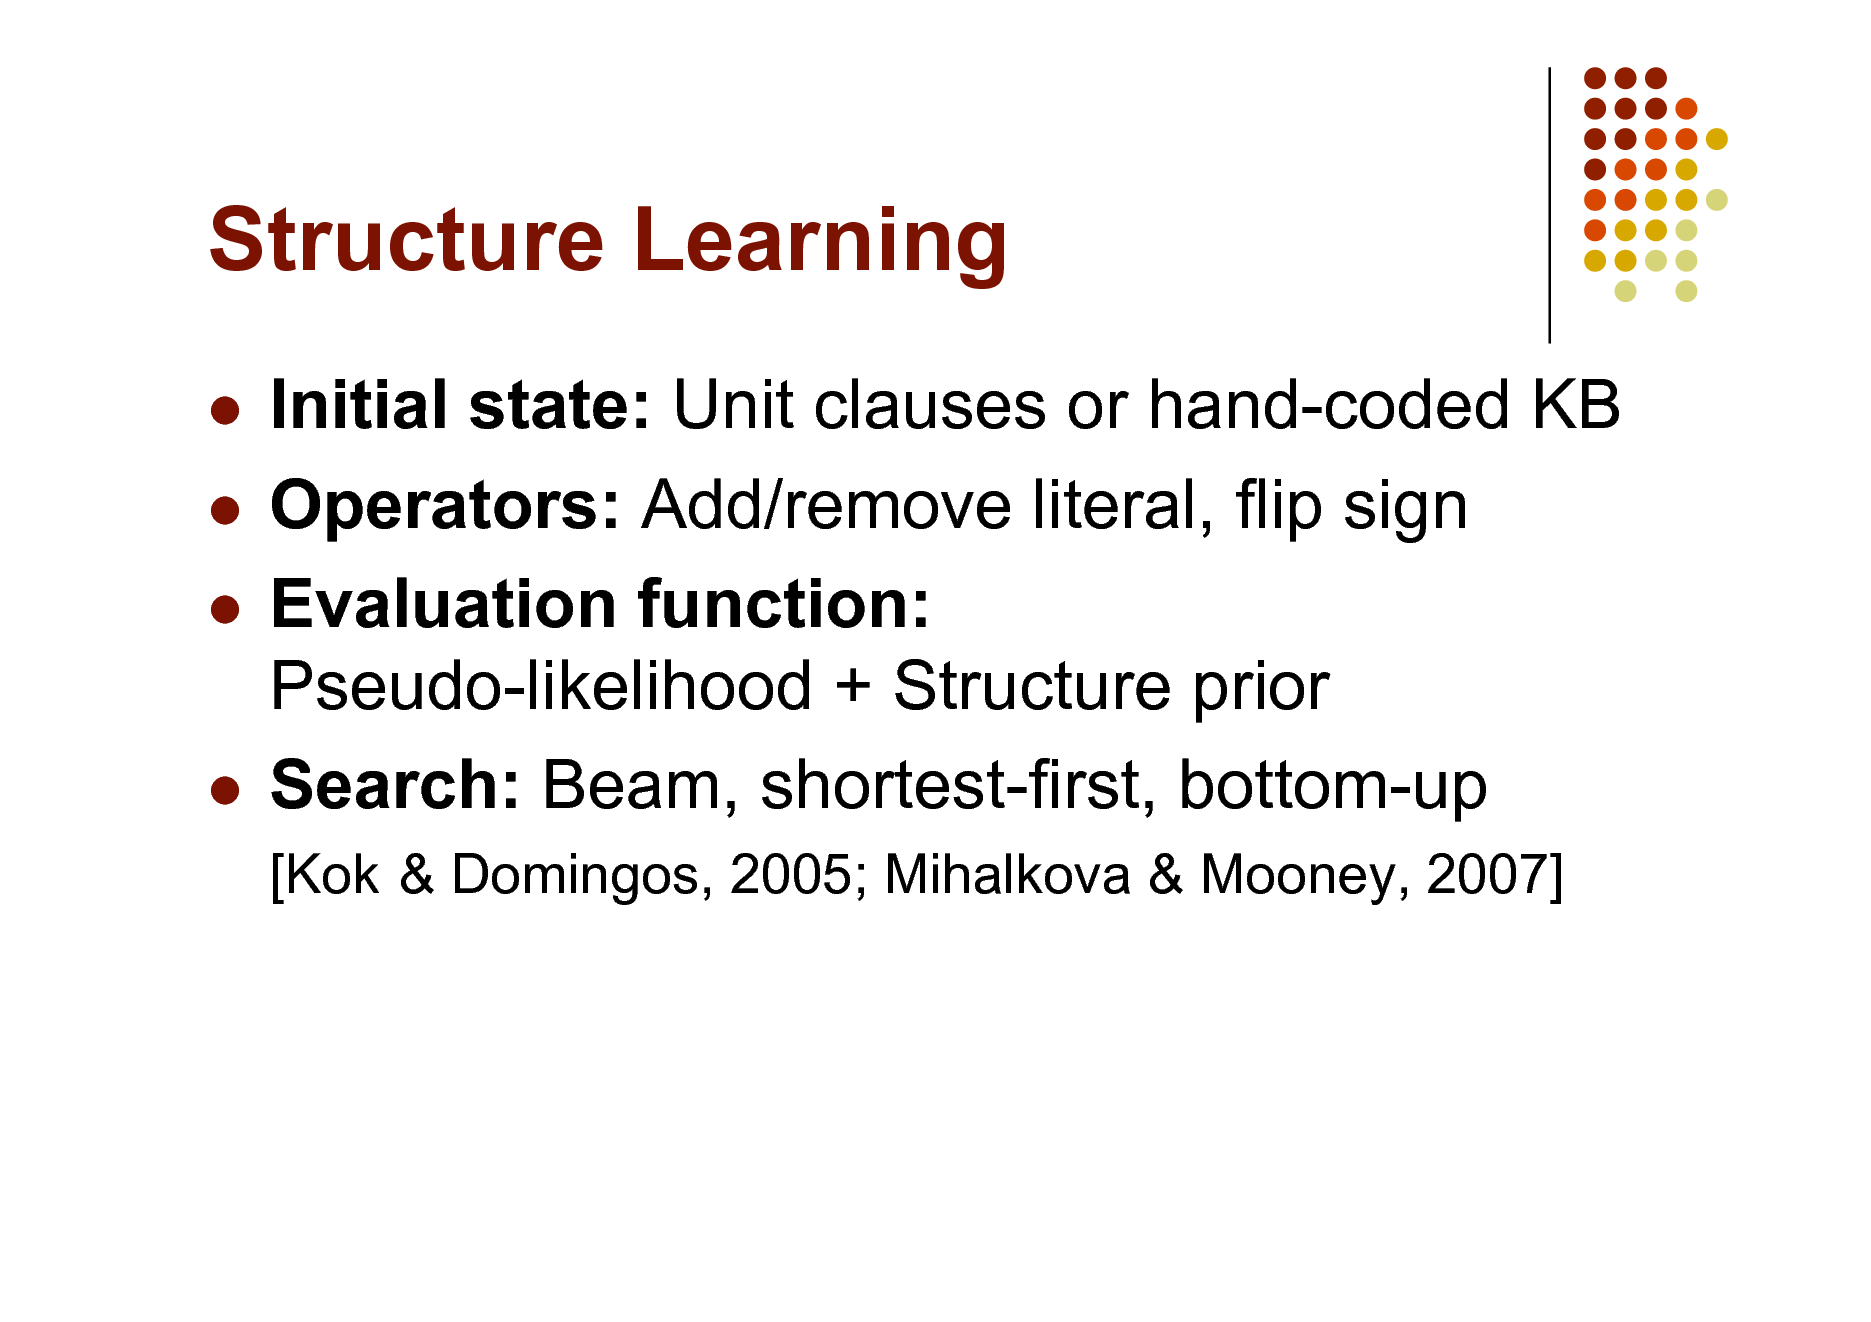 Slide: Structure Learning
Initial state: Unit clauses or hand-coded KB  Operators: Add/remove literal, flip sign  Evaluation function: Pseudo-likelihood + Structure prior  Search: Beam, shortest-first, bottom-up


[Kok & Domingos, 2005; Mihalkova & Mooney, 2007]

